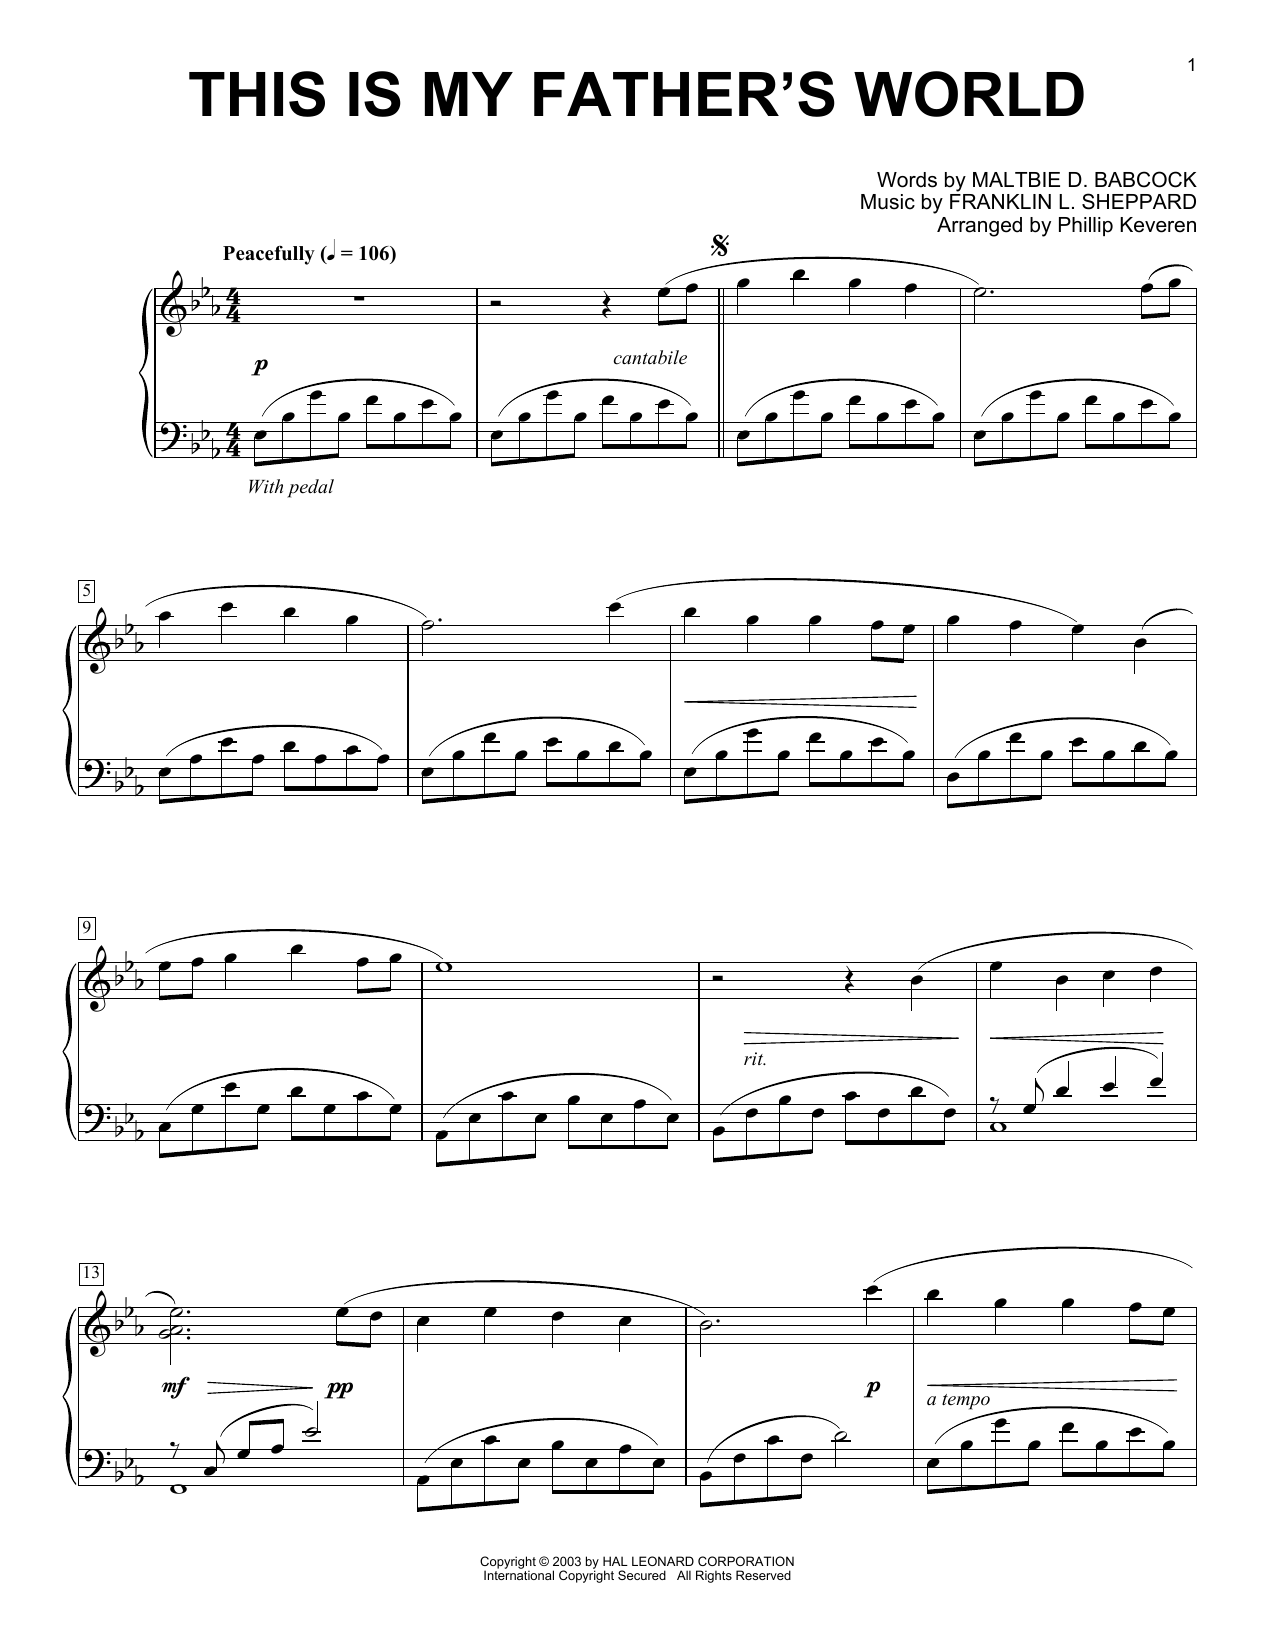 Download Maltbie D. Babcock This Is My Father's World Sheet Music